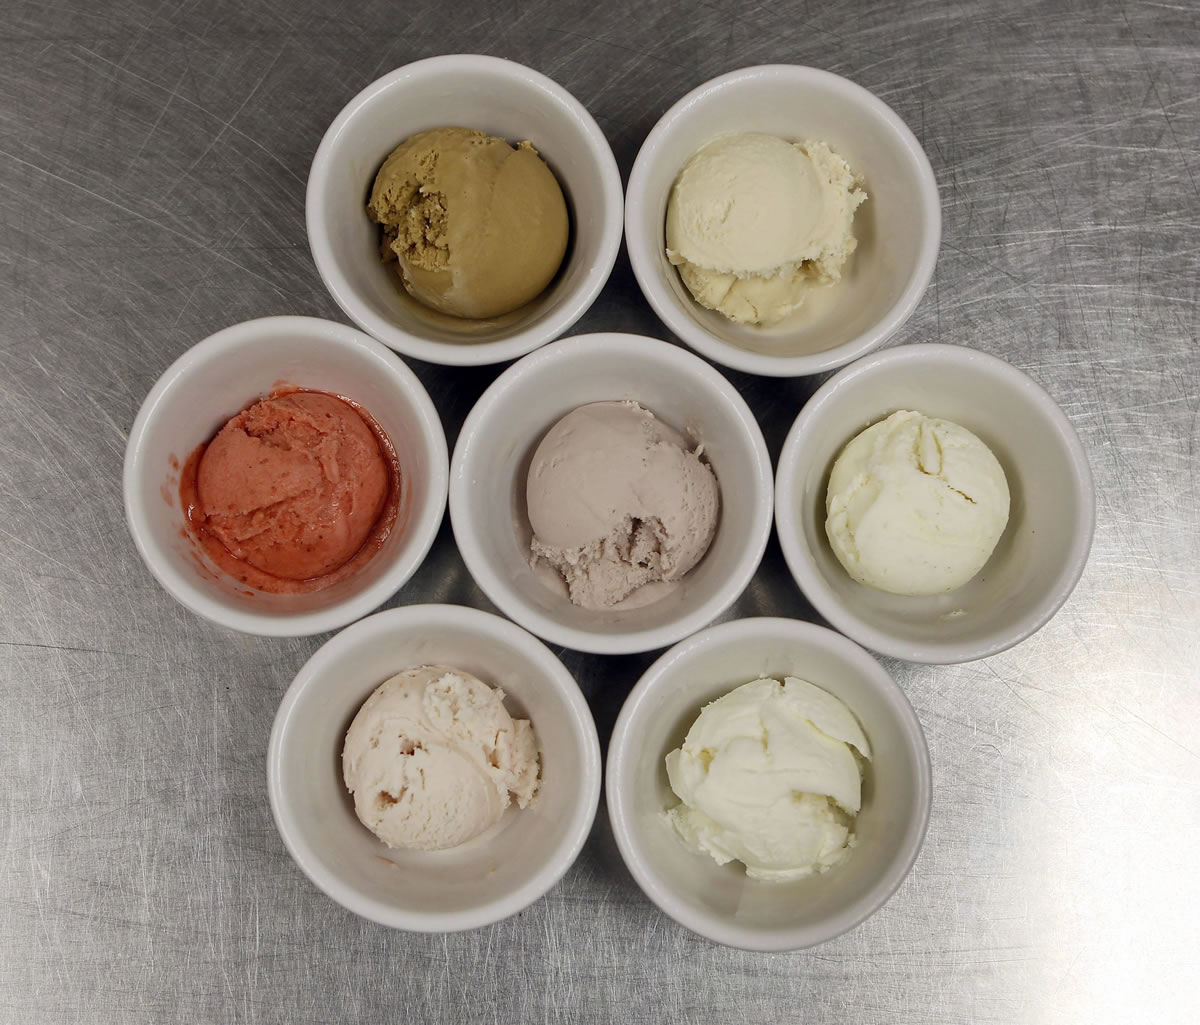 Seven of the homemade ice creams at the Thai Orchid Cafe in Lexington: Pictured are coffee stout, top left, bourbon-honey; middle row from left, organic strawberry sorbet, Kentucky blackberry and vanilla bean; bottom row from left, organic strawberry and coconut.